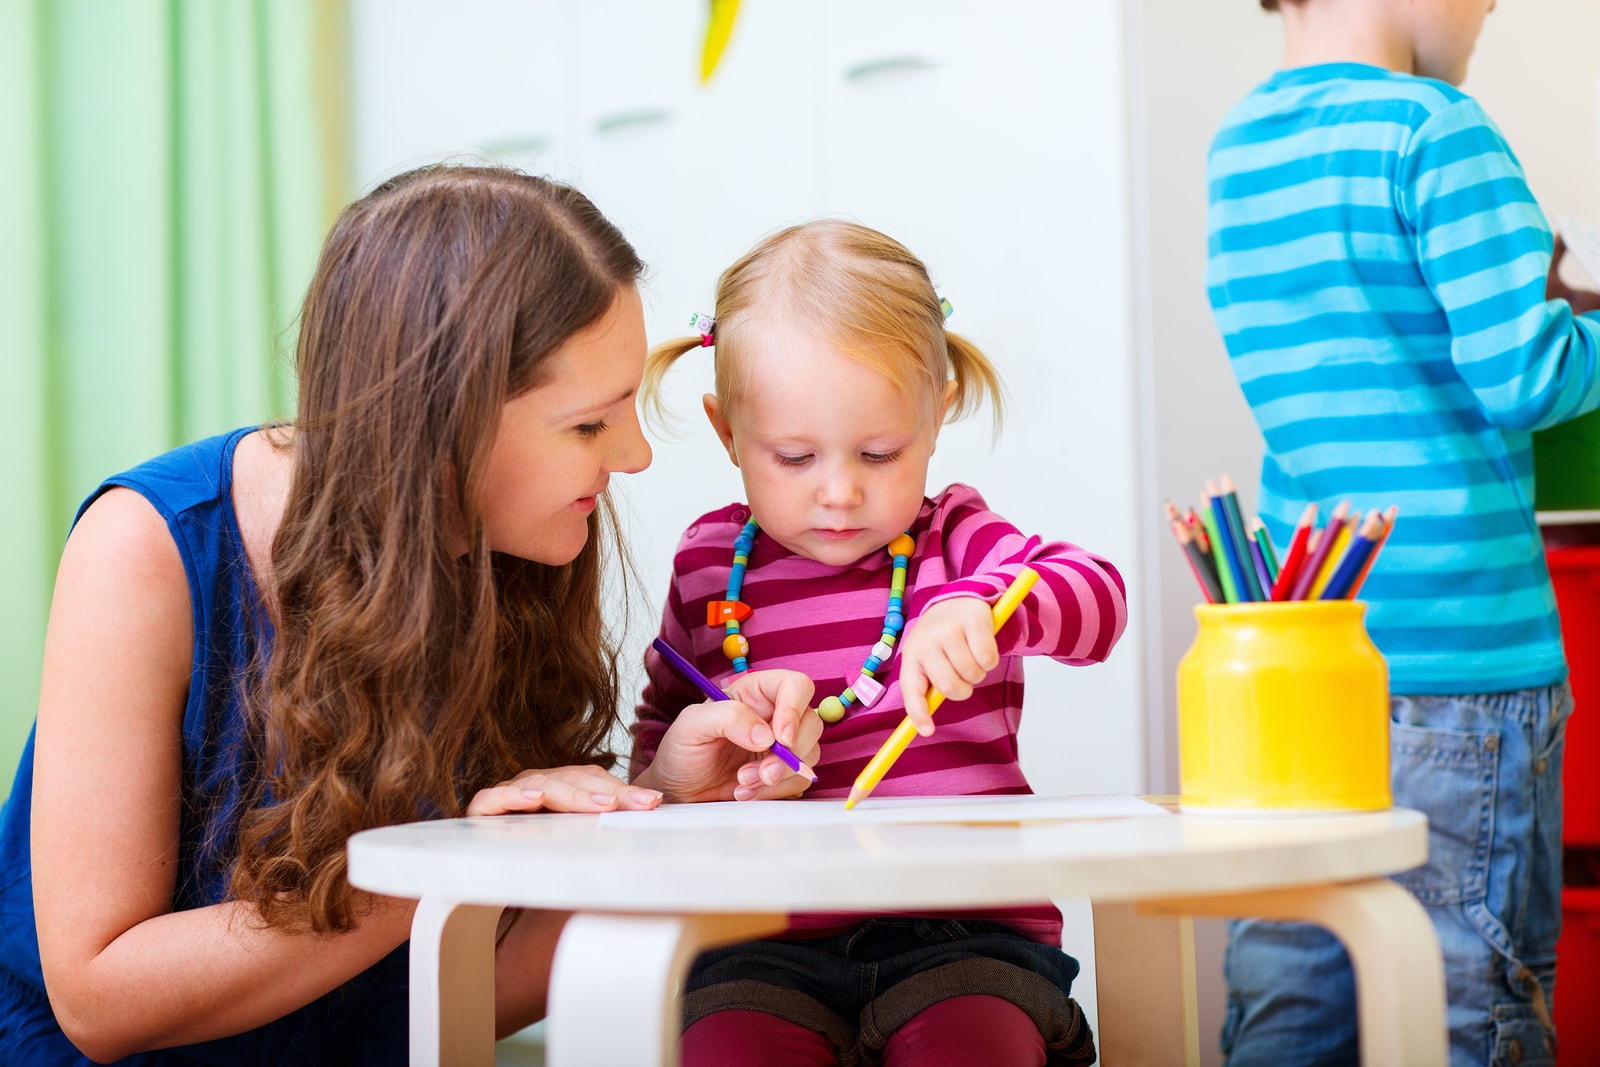 Child Care Costs More Than College in Most of U.S.